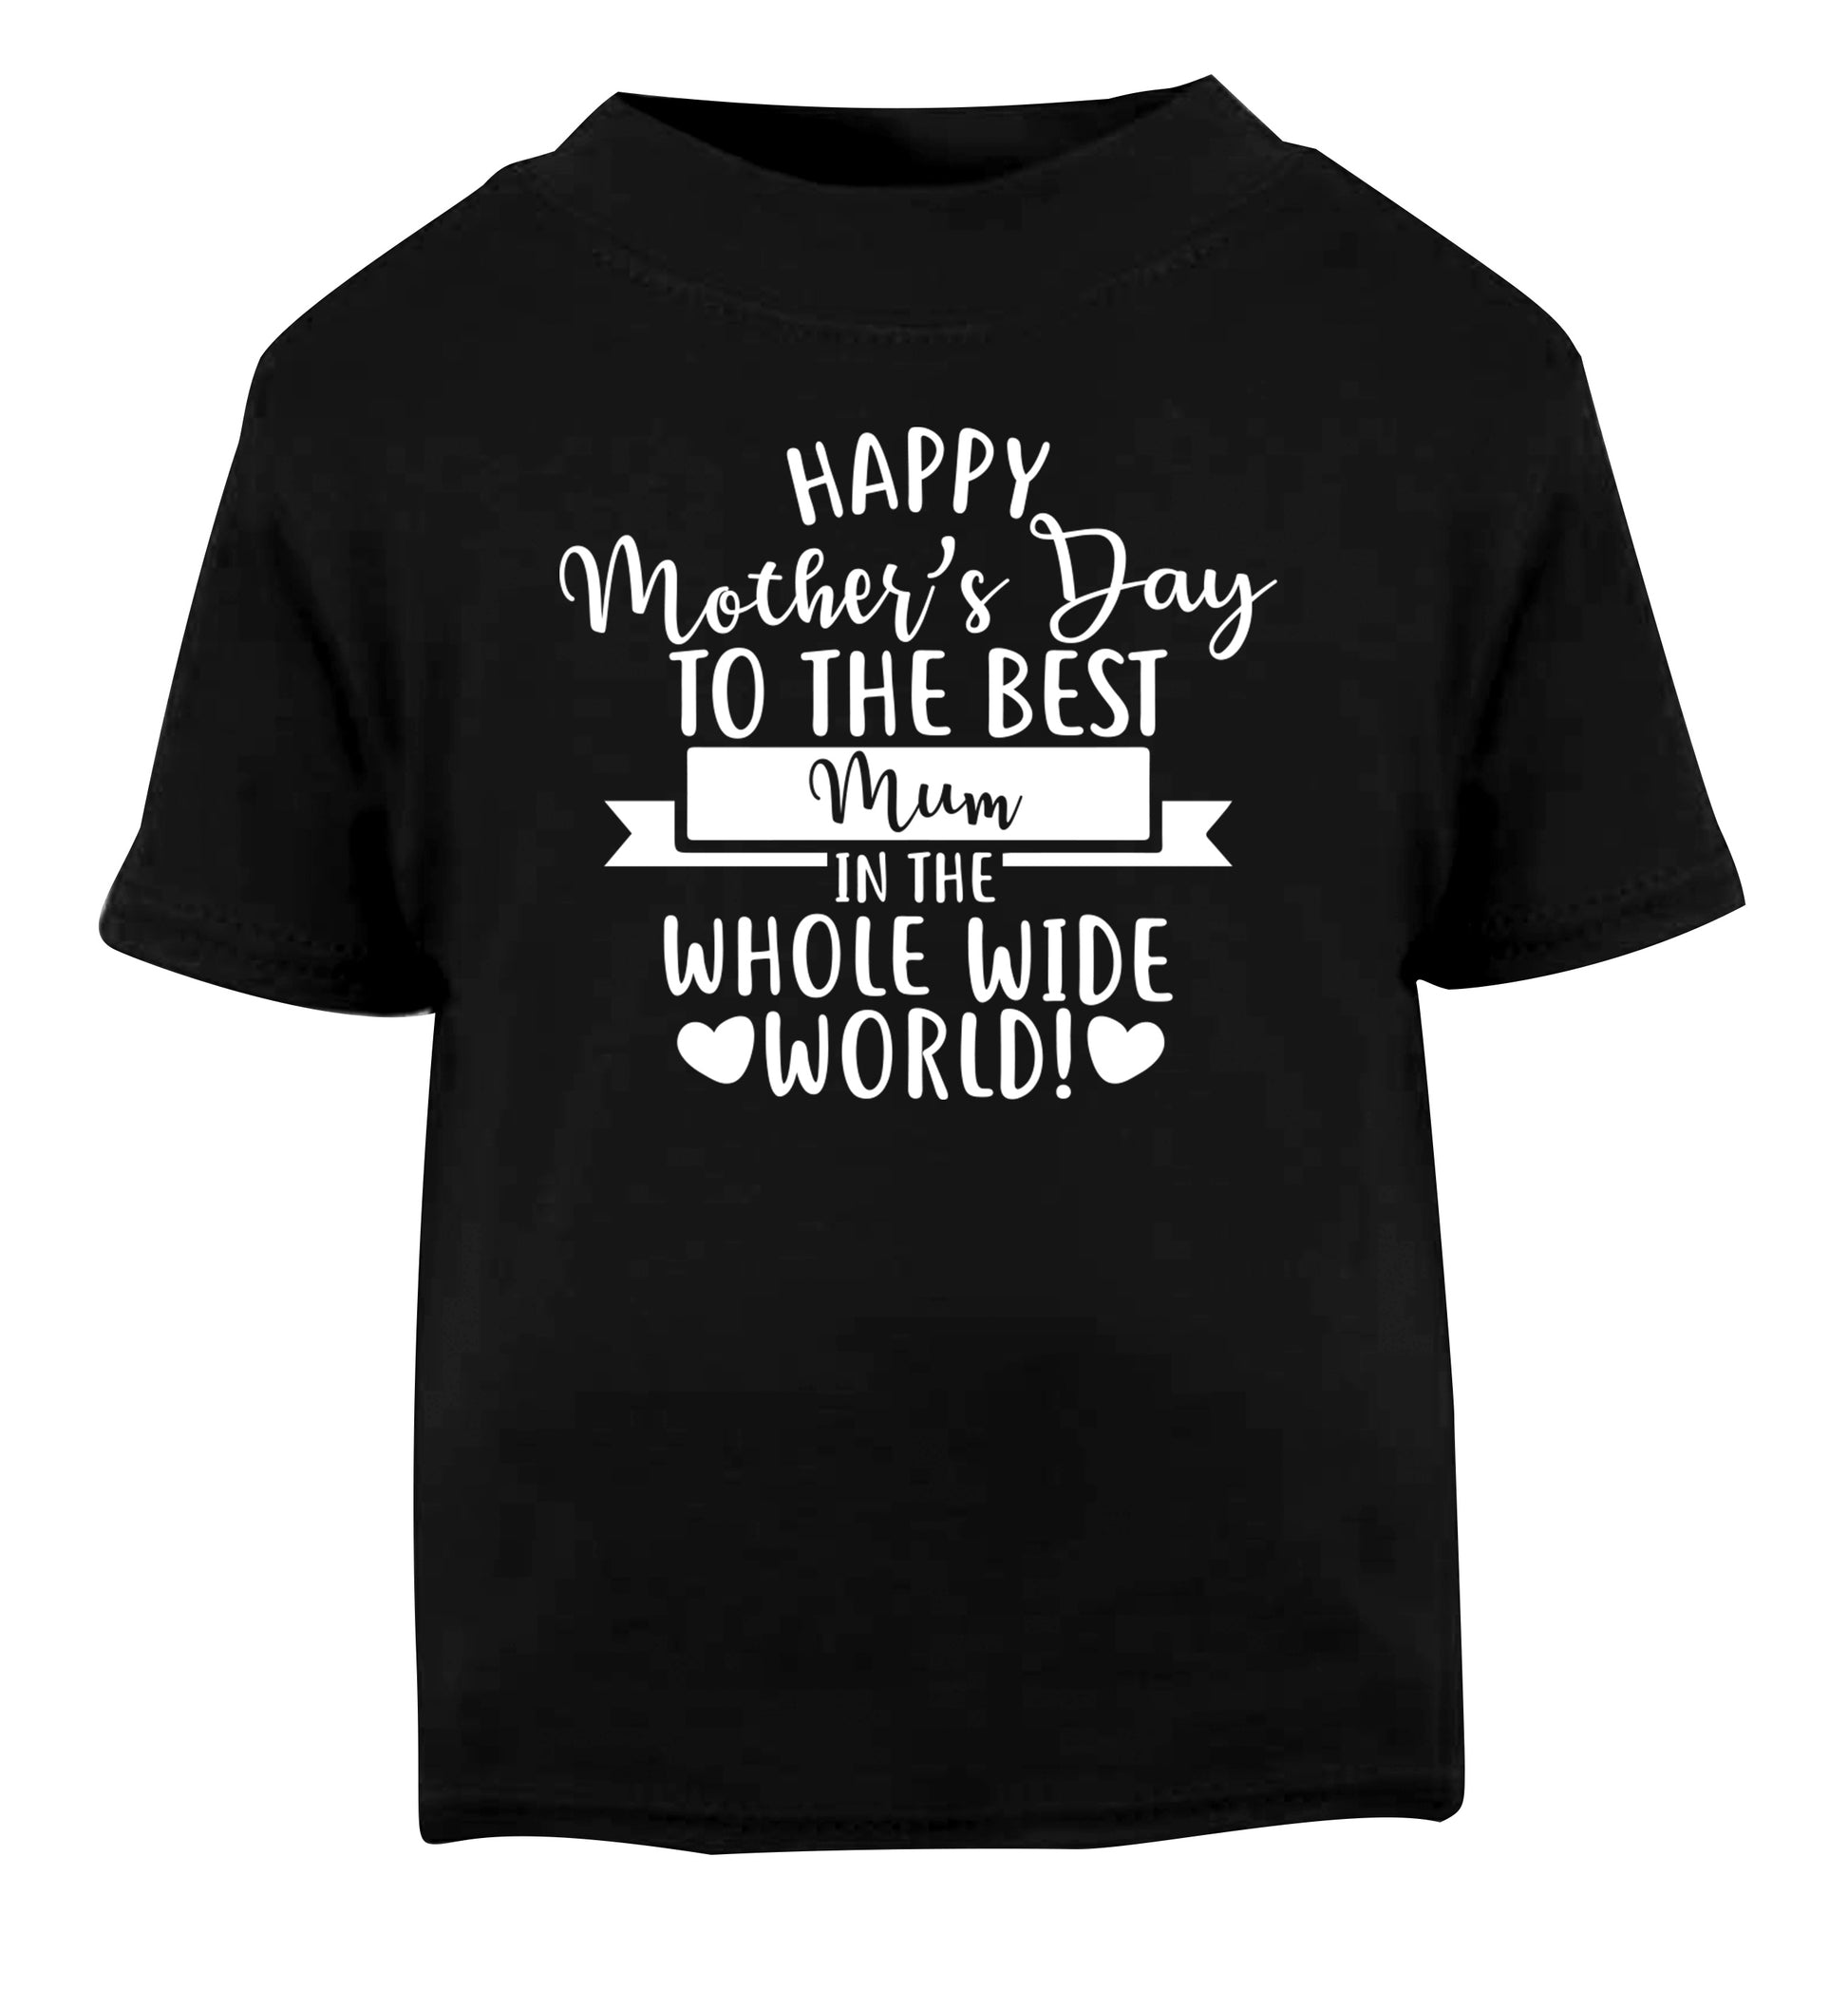 Happy Mother's Day to the best mum in the whole wide world! Black Baby Toddler Tshirt 2 years